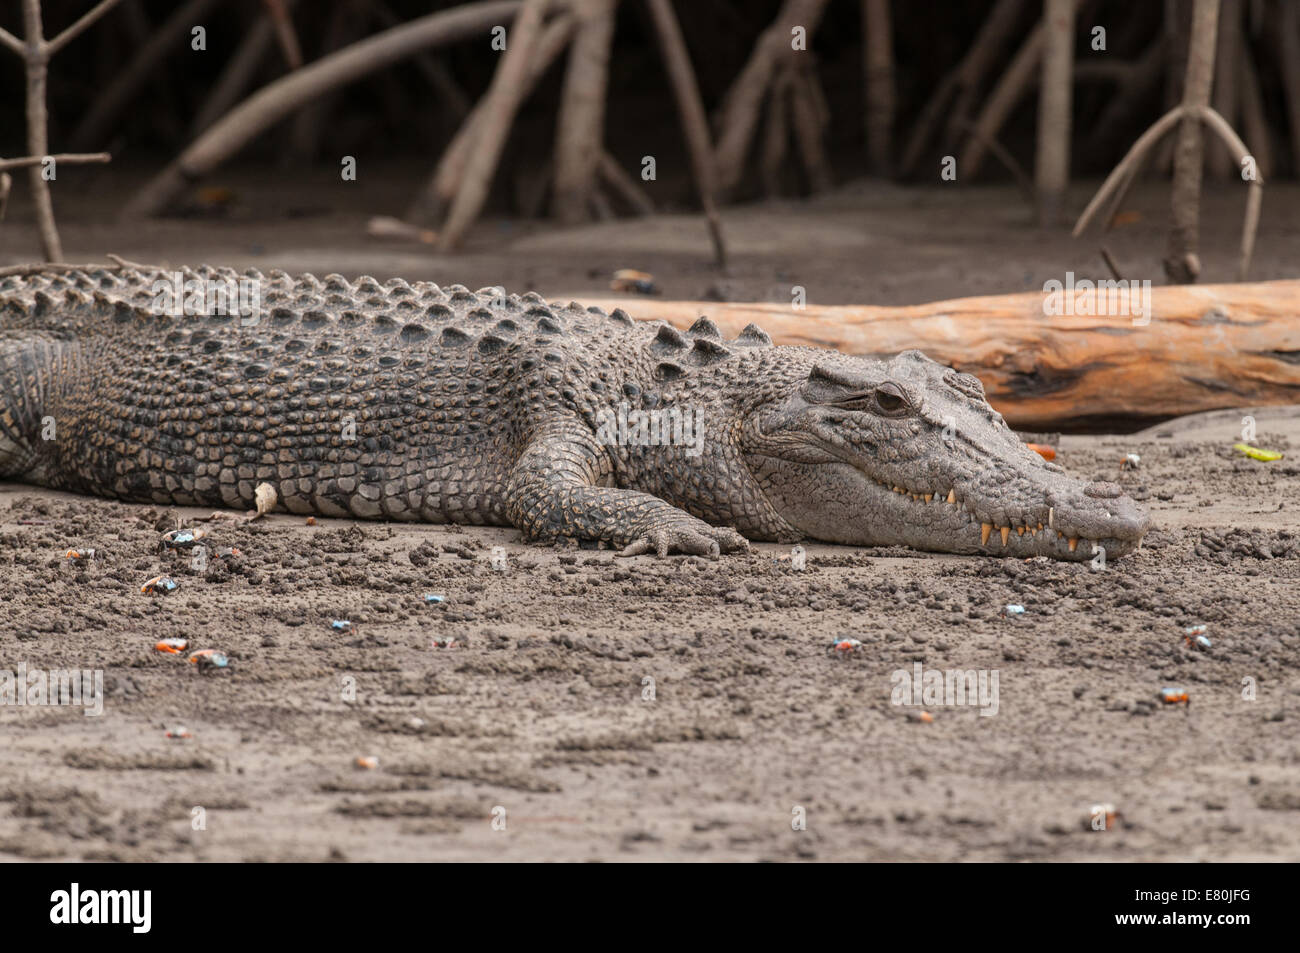 Stock photo of a saltwater crocodile resting on the riverbank. Stock Photo